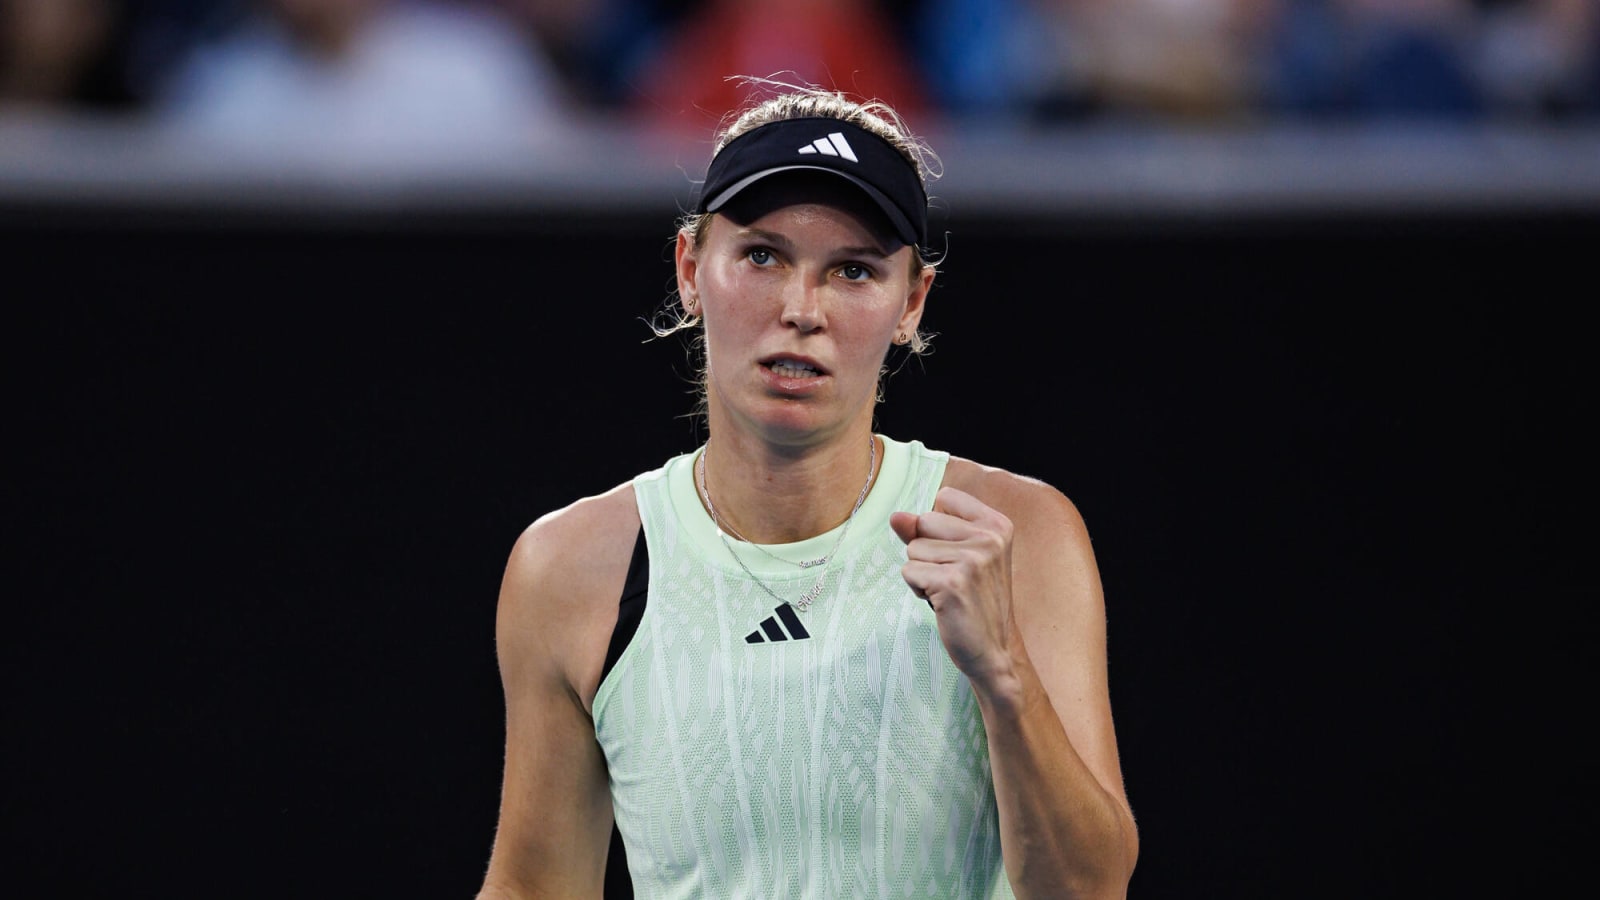 Caroline Wozniacki left ‘disappointed’ over early second round Australian Open exit